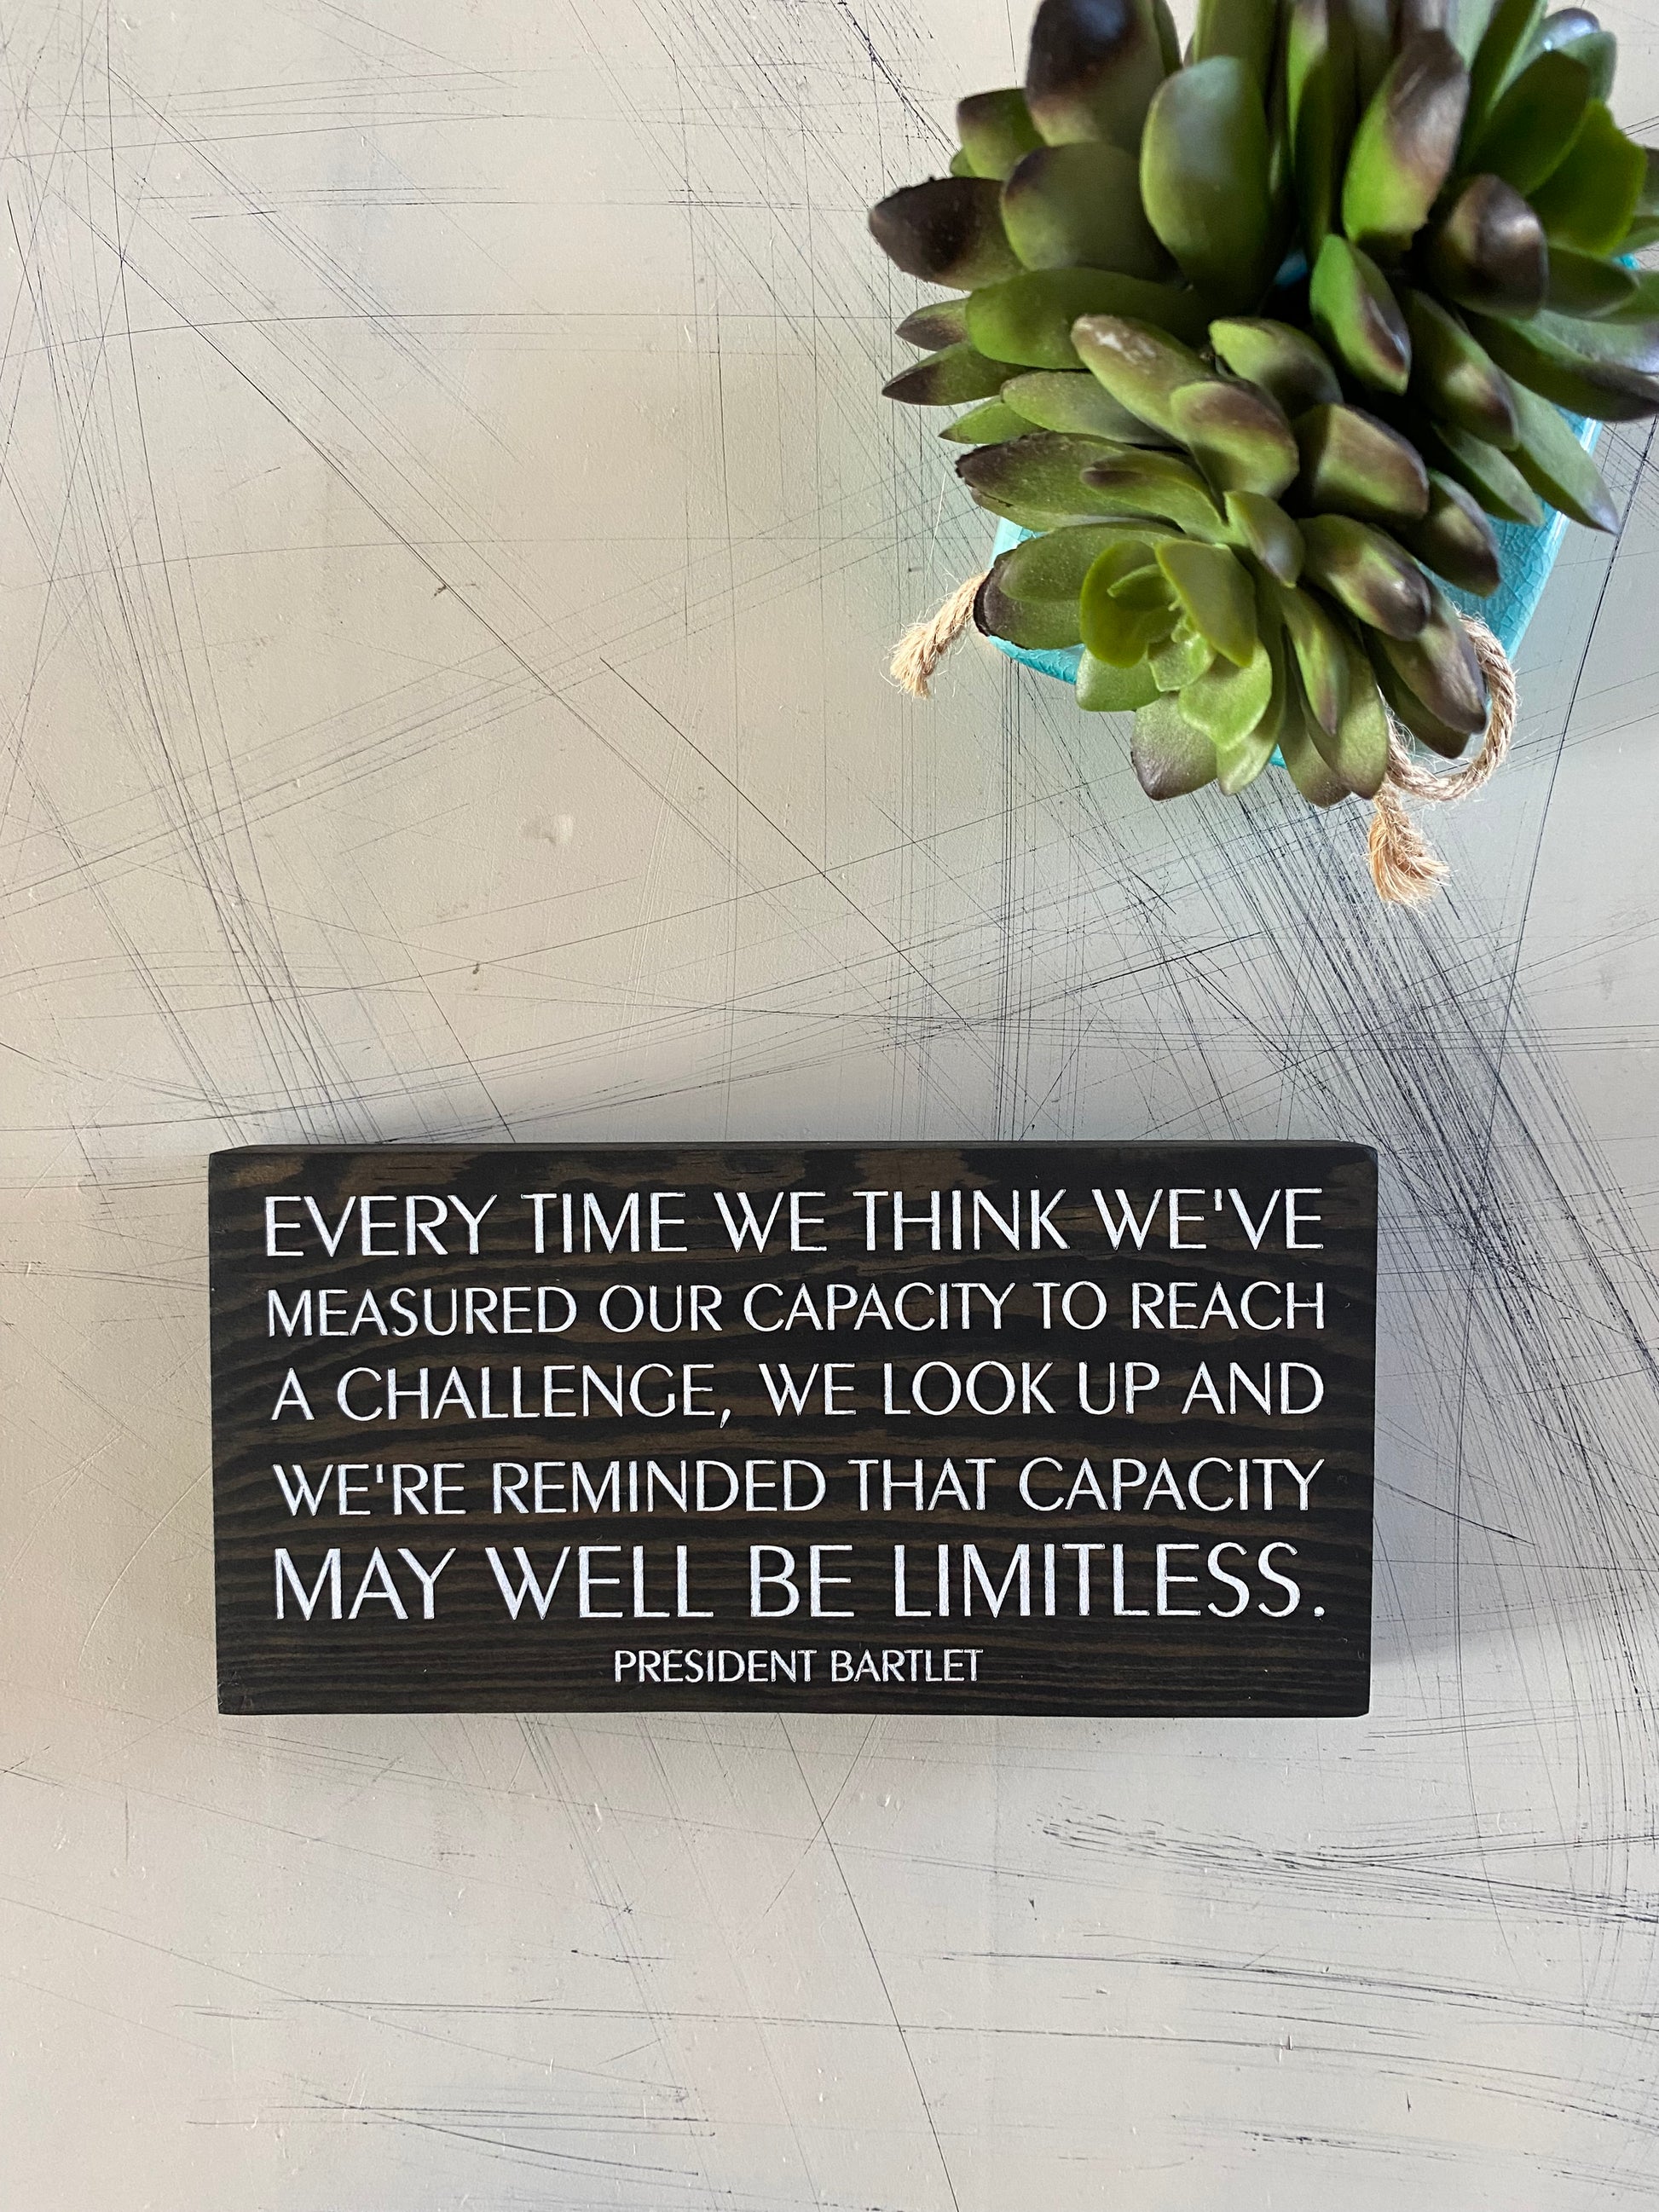 We look up and we're reminded that capacity may well be limitless. - handmade mini wood sign